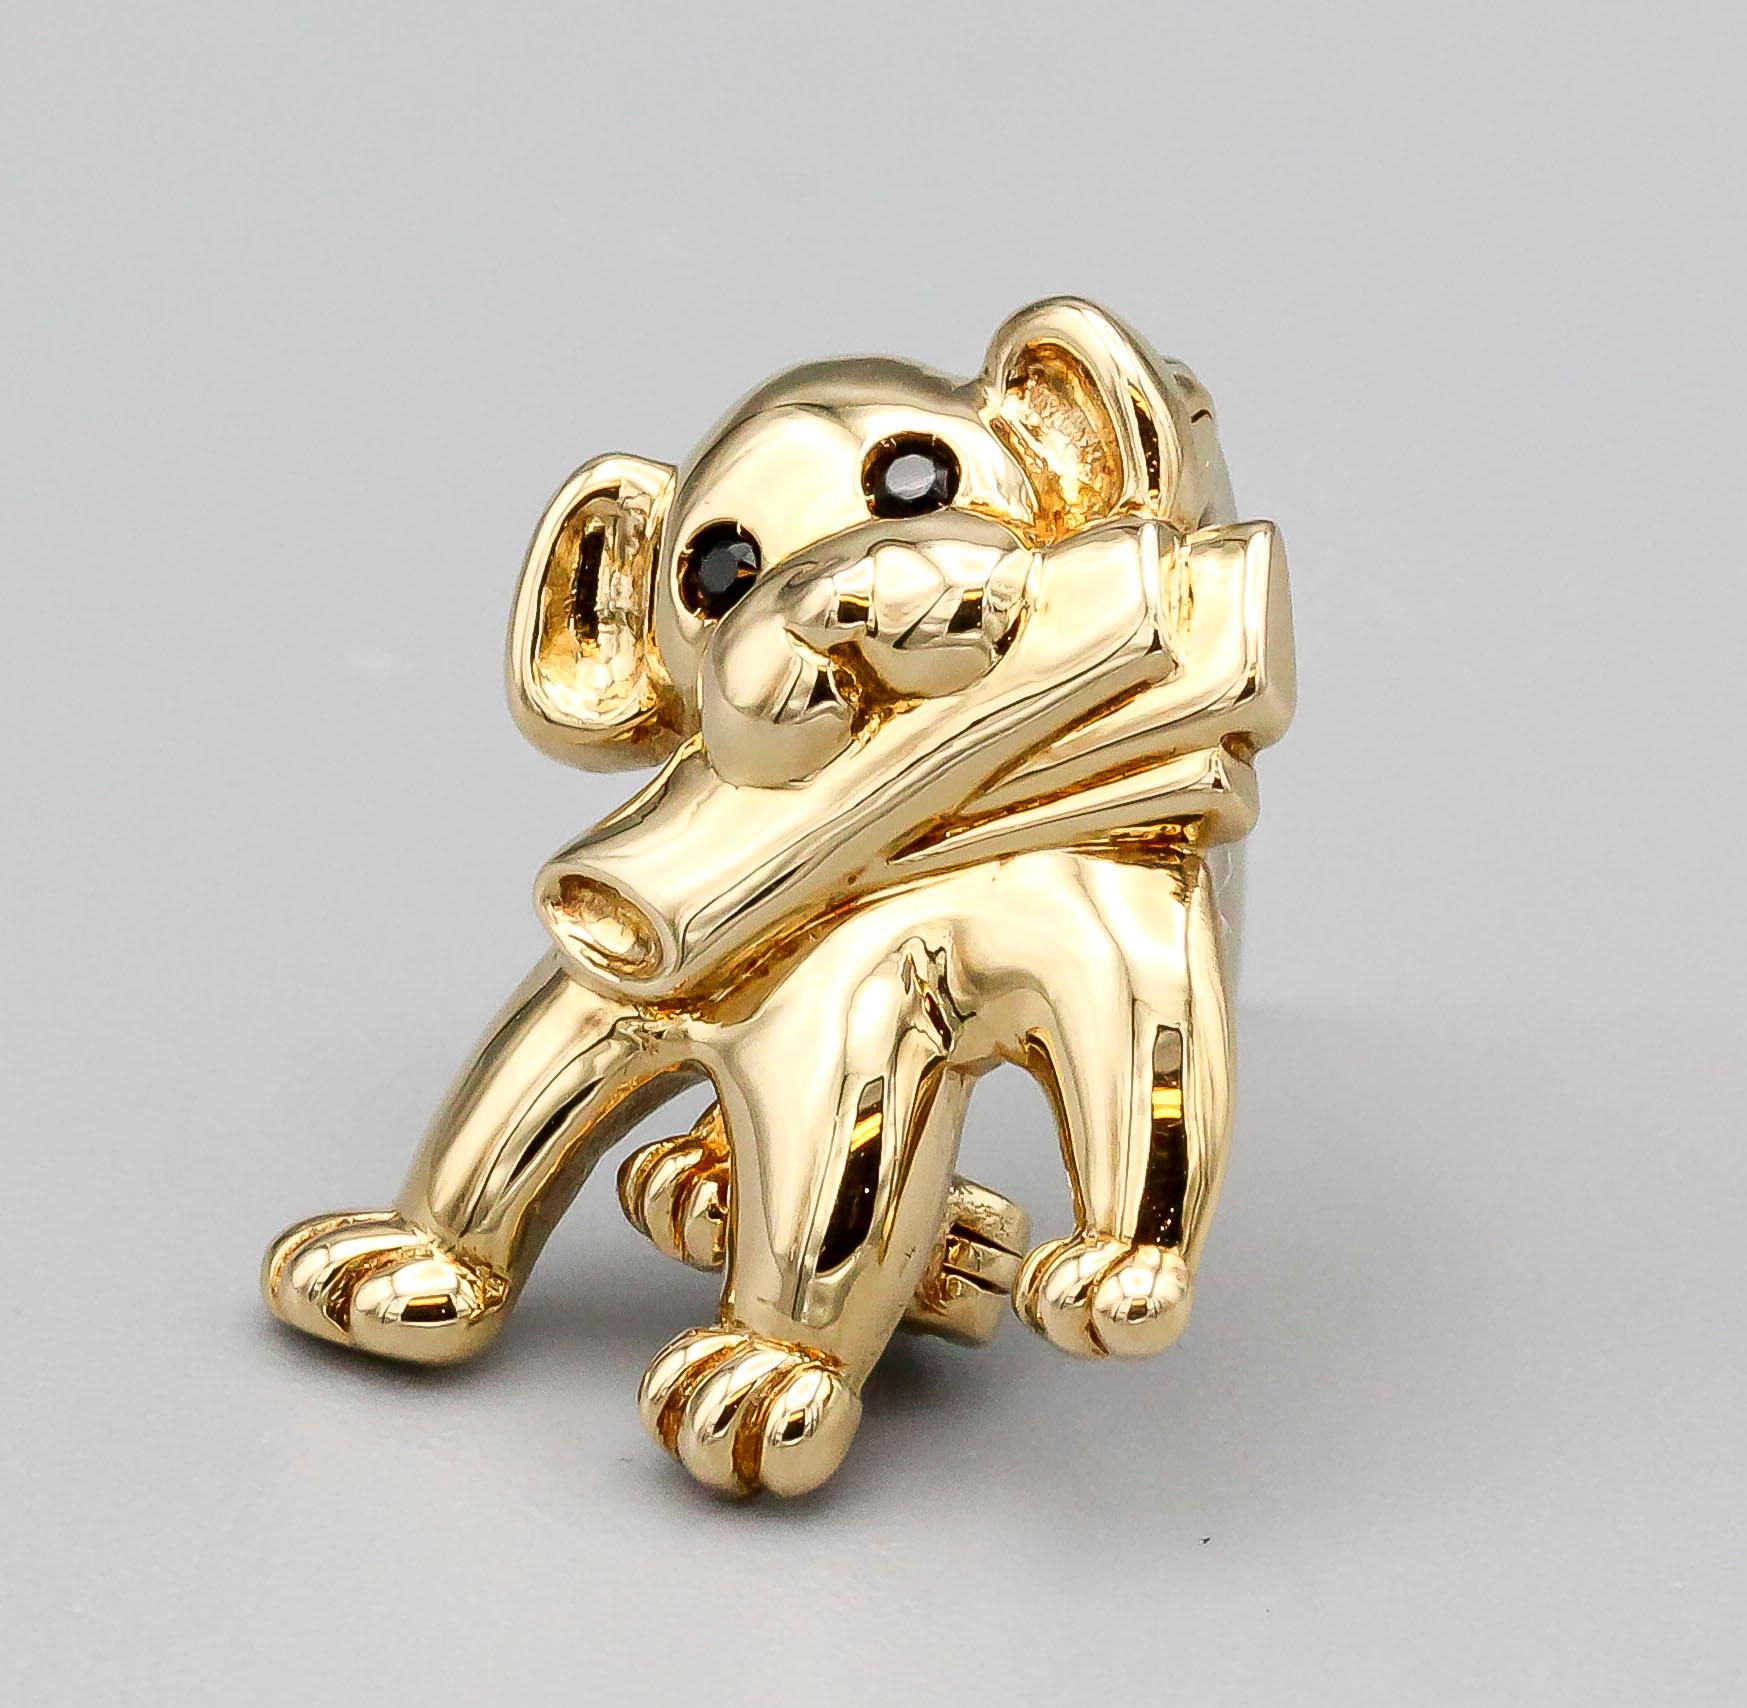 Fine and rare brooch by Van Cleef and Arpels, of French origin and circa late 20th Century.  This brooch is made in the likeness of a small dog with a rolled up newspaper in its mouth.  

The Van Cleef & Arpels brooch is a lovely piece of jewelry